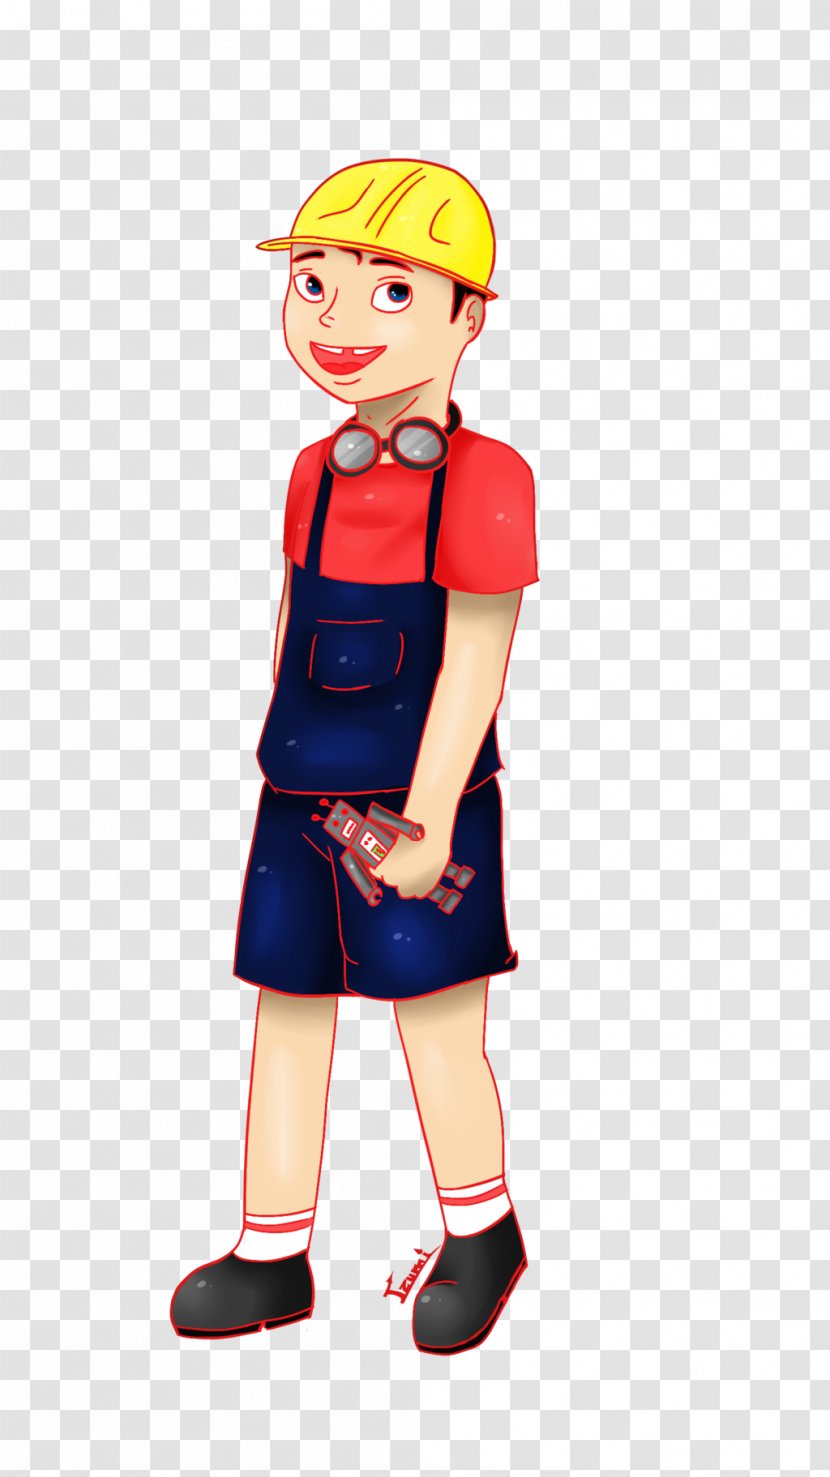 Team Fortress 2 Cartoon Engineer Drawing - Clothing - Uniform Transparent PNG